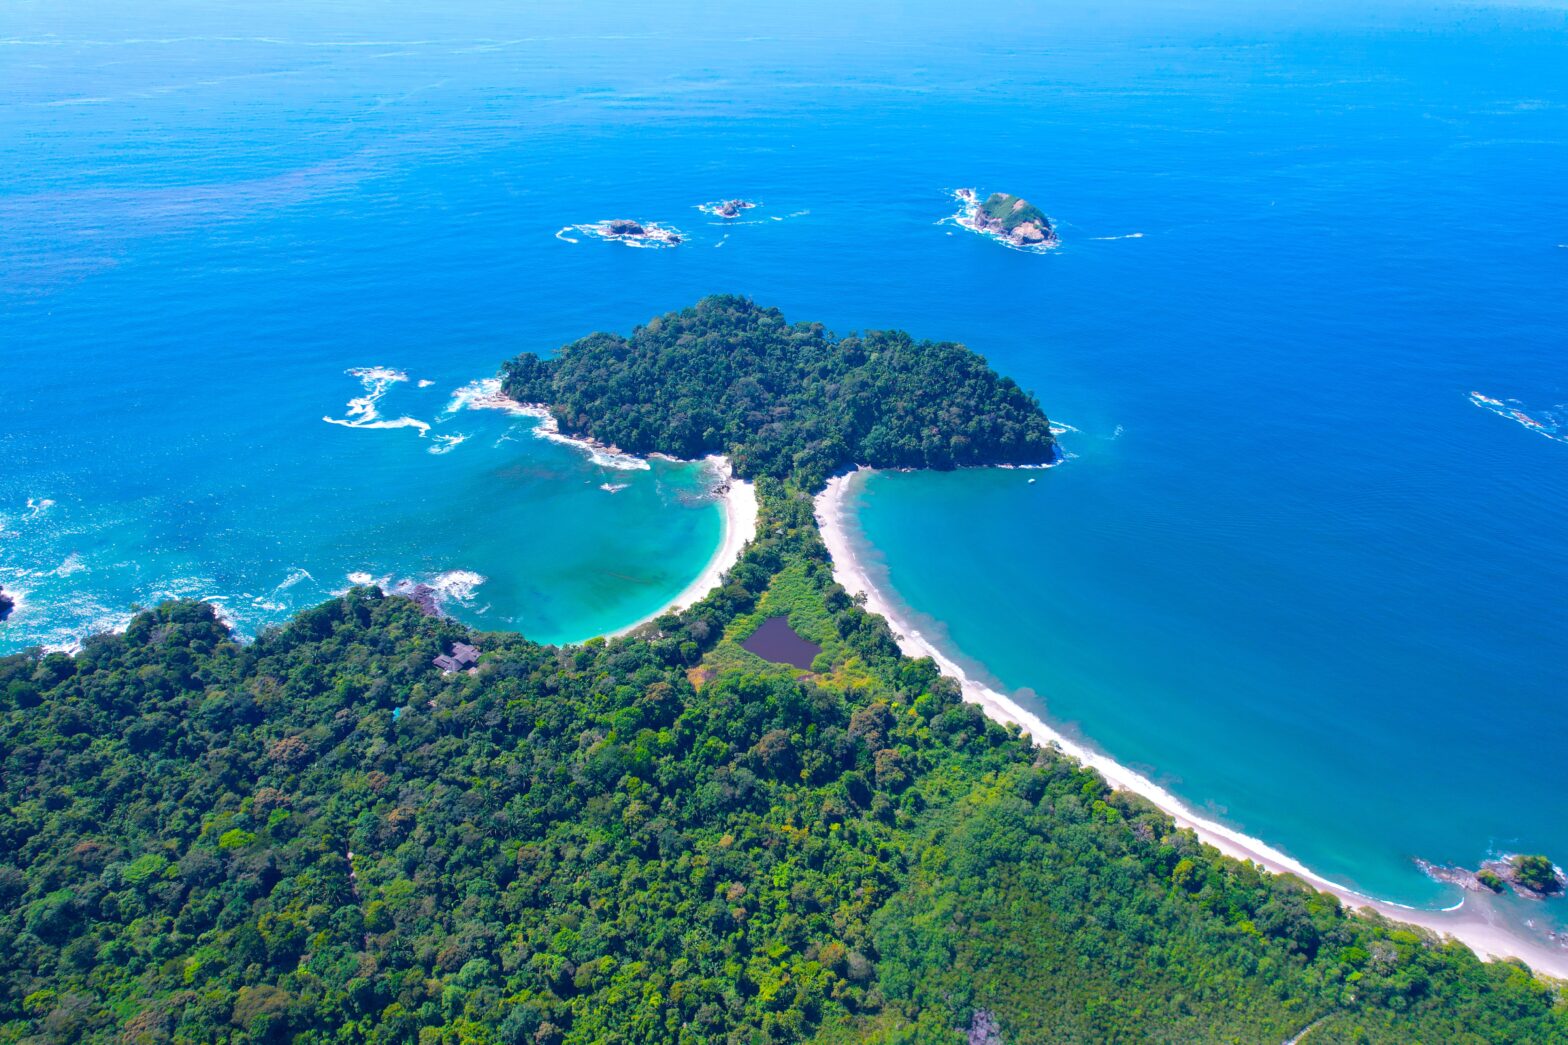 The Costa Rica peninsula. Want to learn about the best areas for vacation in Costa Rica and a few staff-picked locations to stay at? Read on to plan your next vacation.